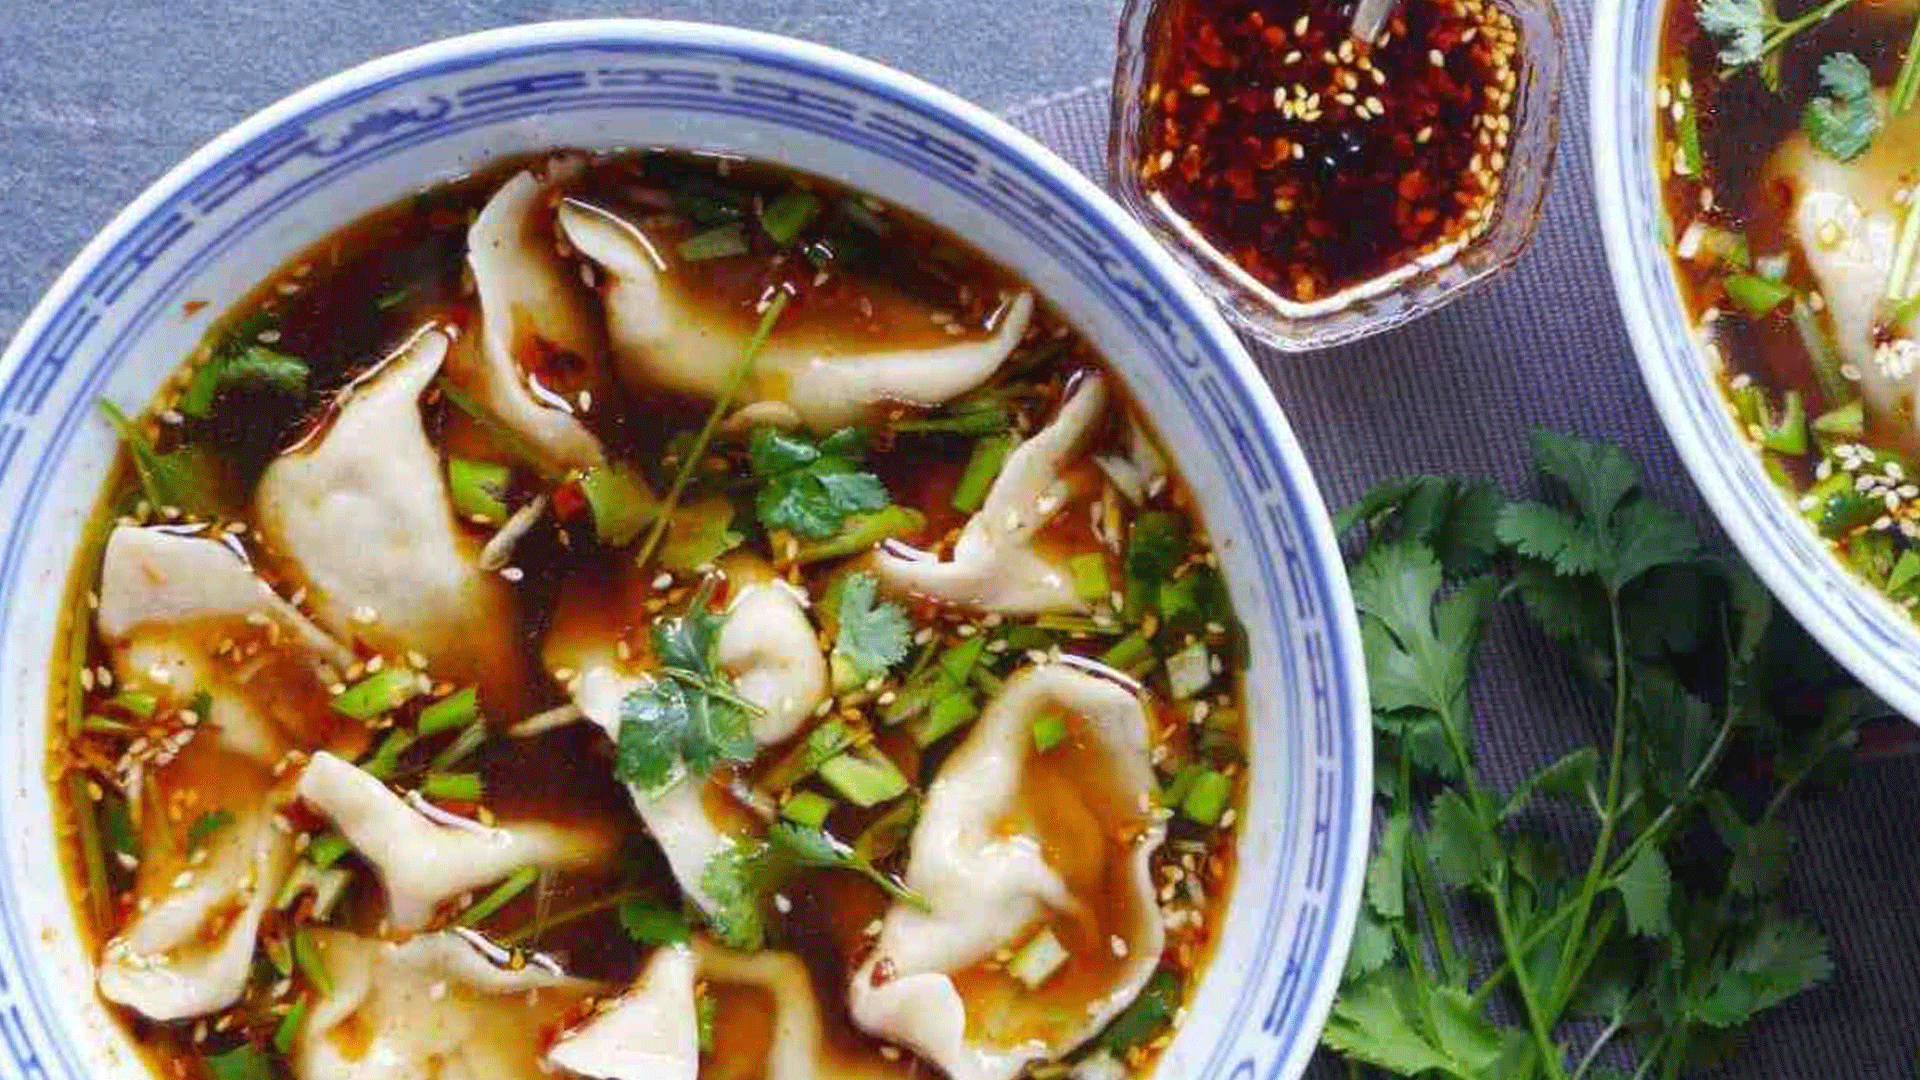 Beef Dumplings in Hot & Sour Soup with Spiced Vinegar